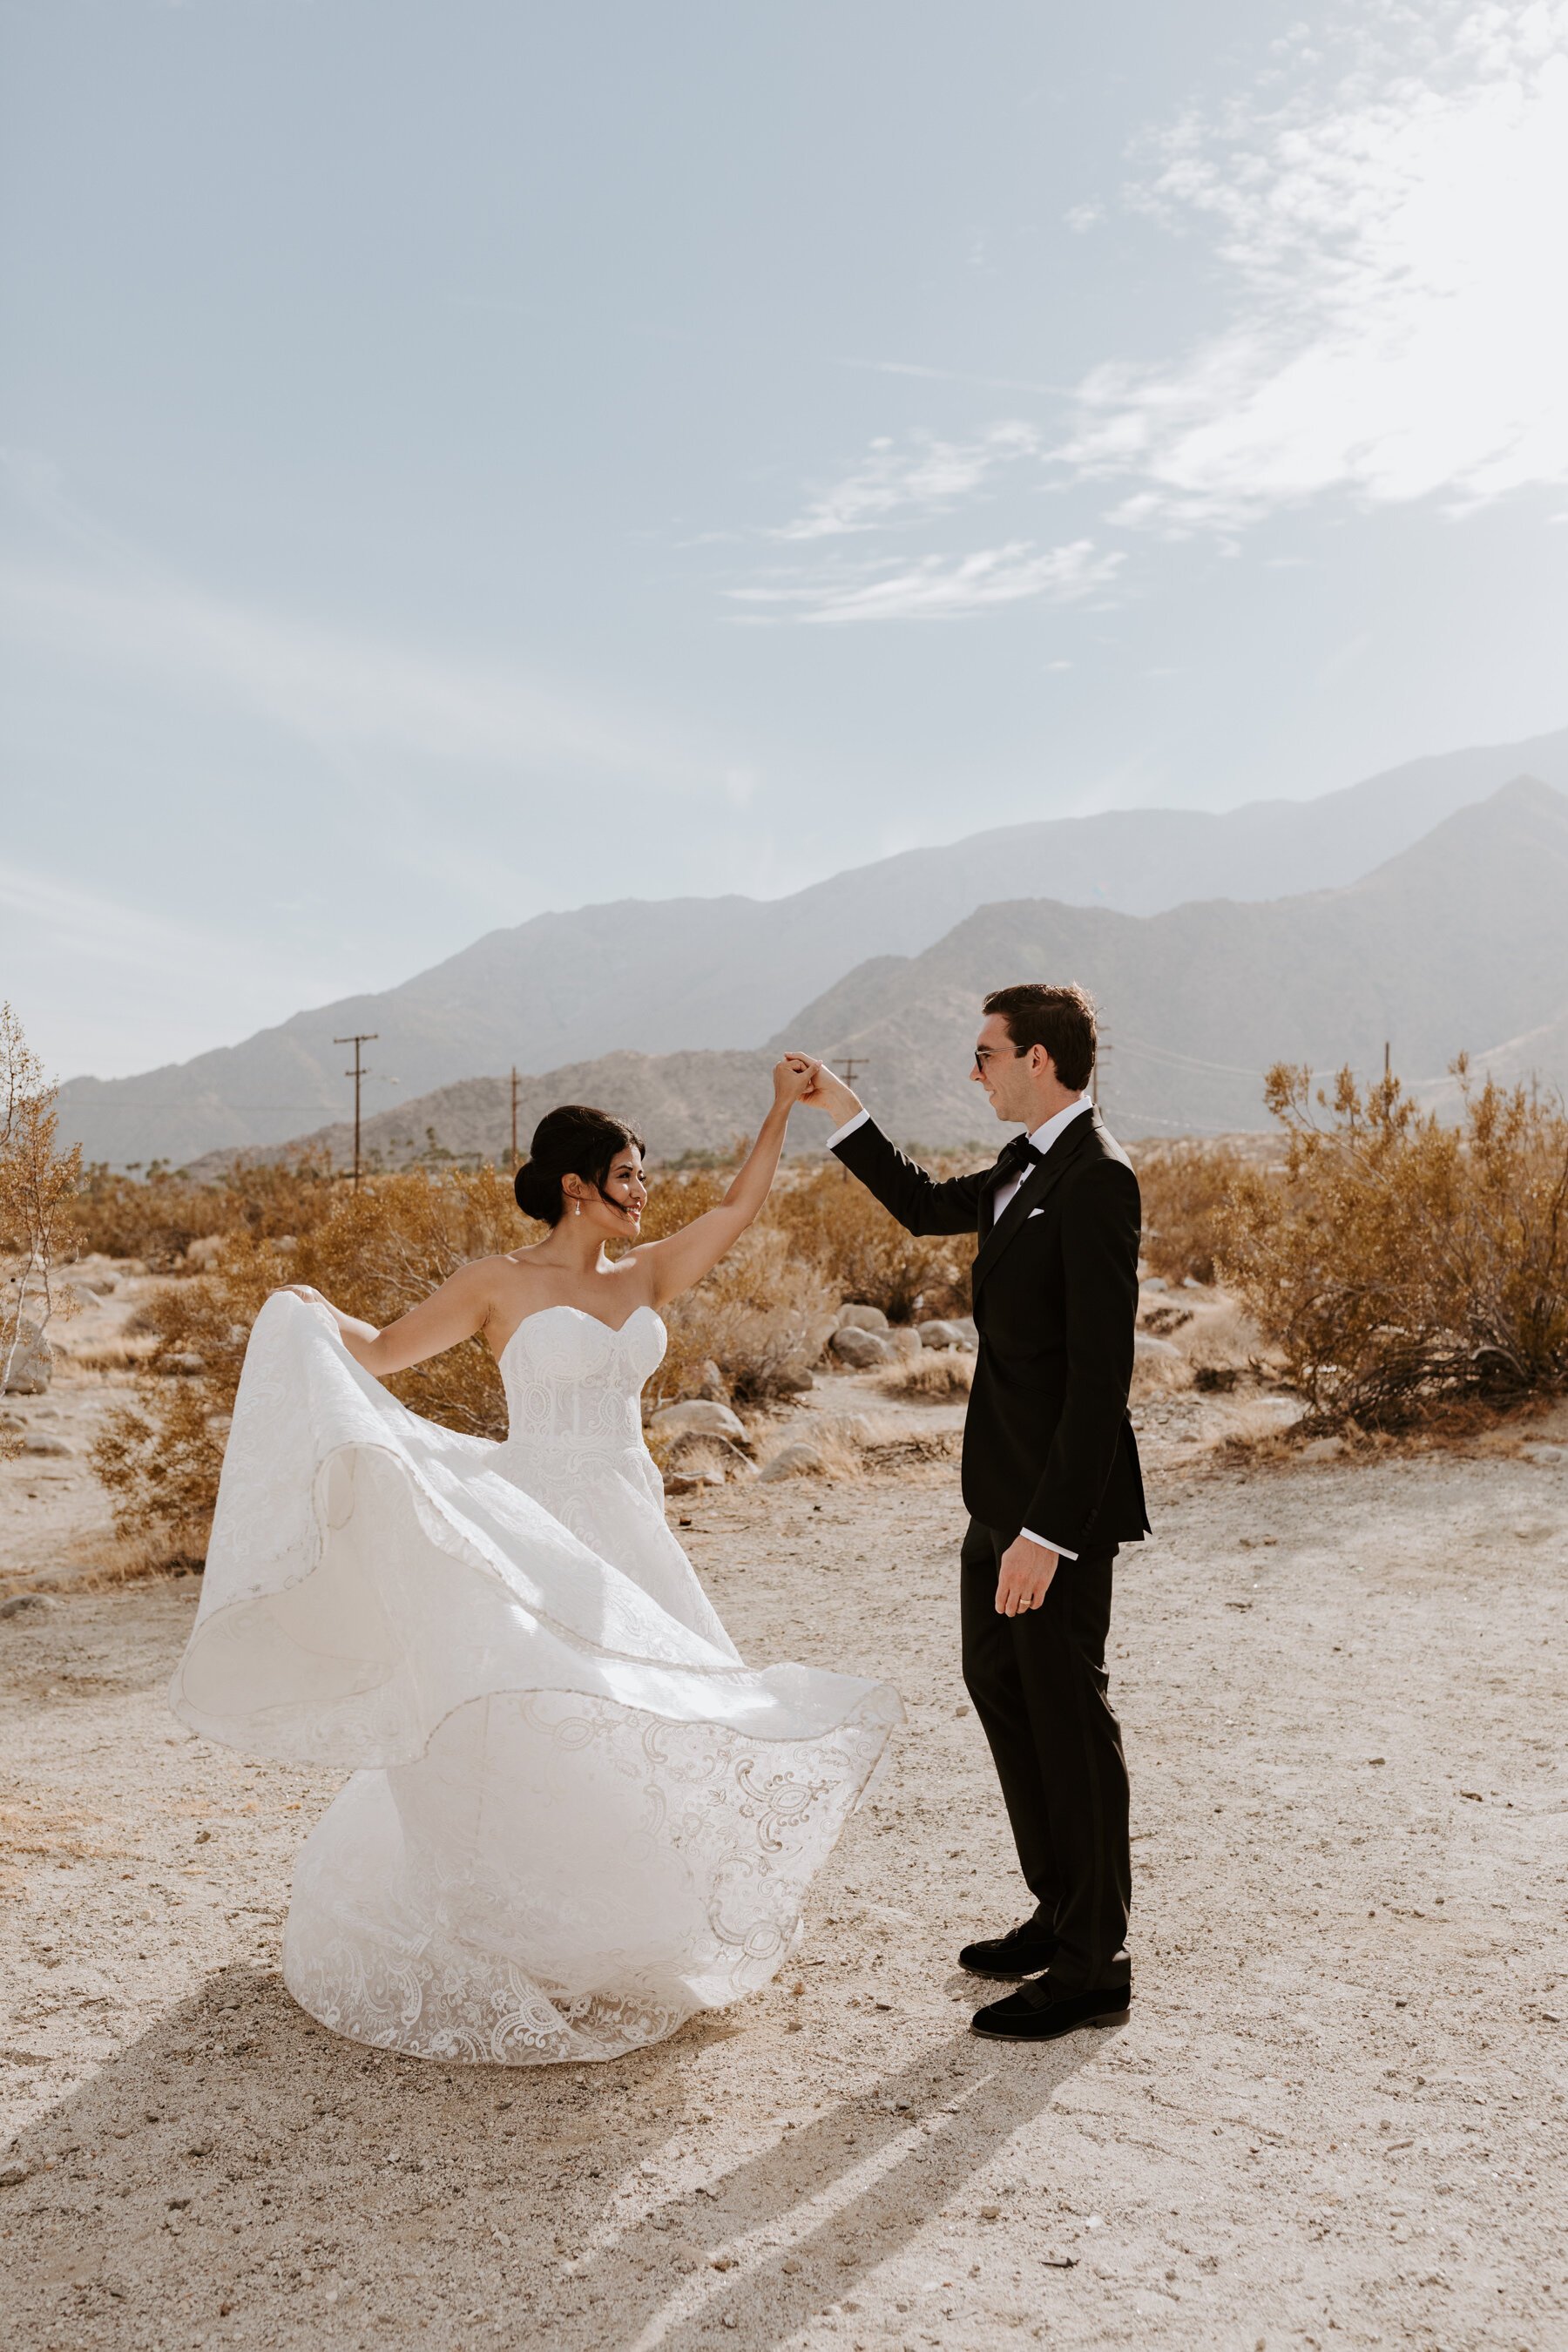 Bride and Groom twirling, Palm Springs Wedding and Elopement Photographer, Photo by Tida Svy